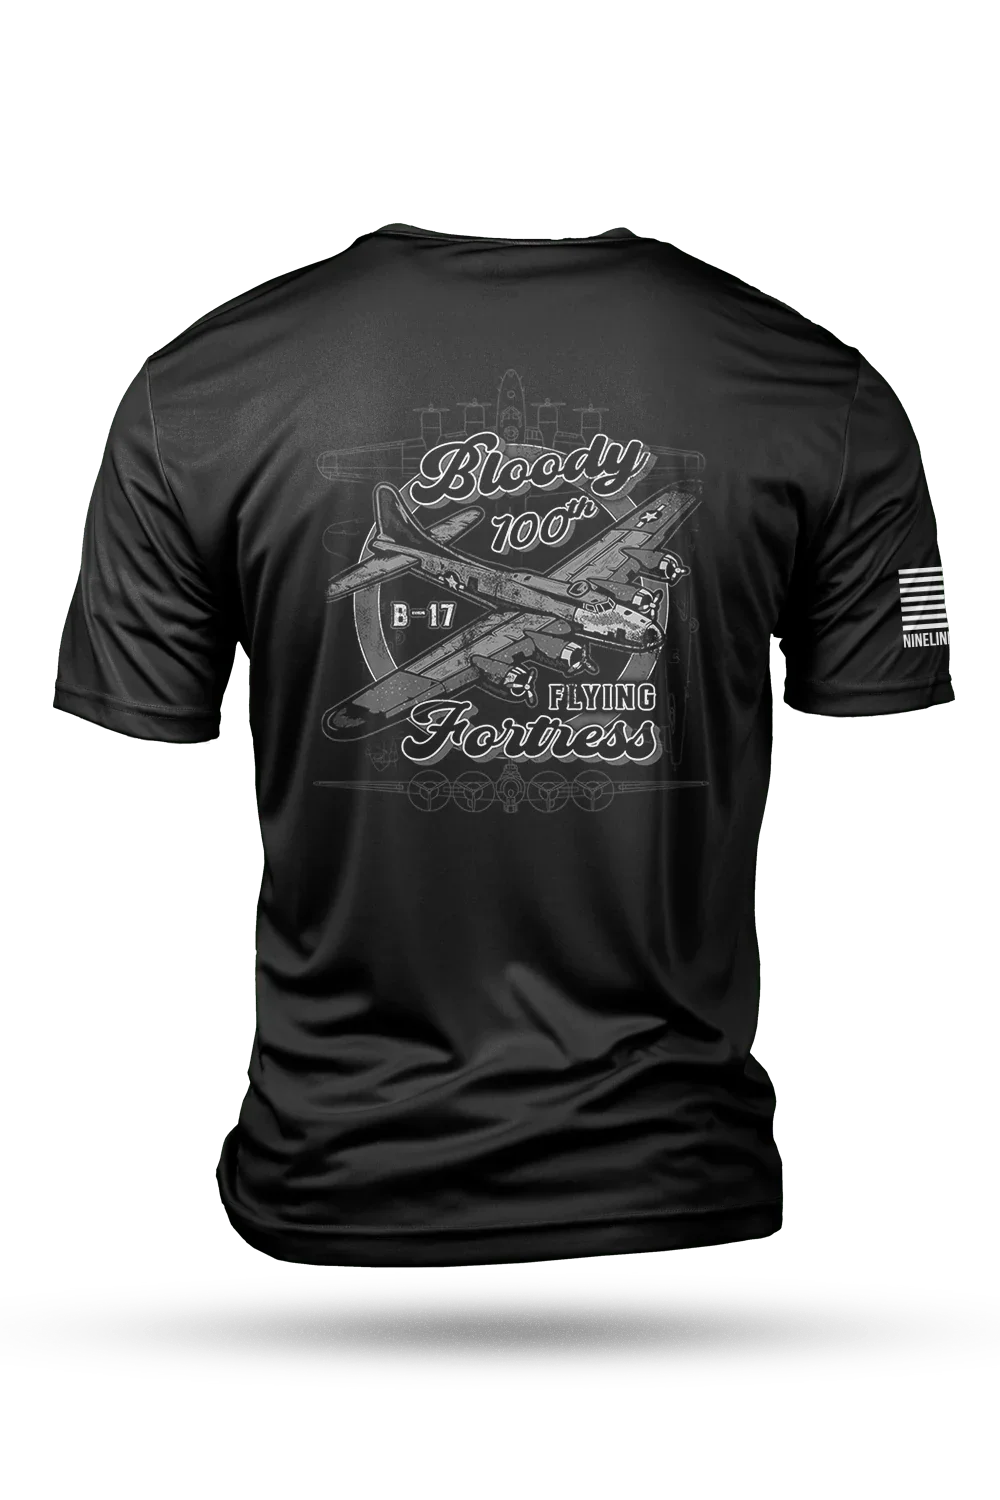 Image of Men's Moisture Wicking T-Shirt - B-17 FLYING FORTRESS SCHEMATIC